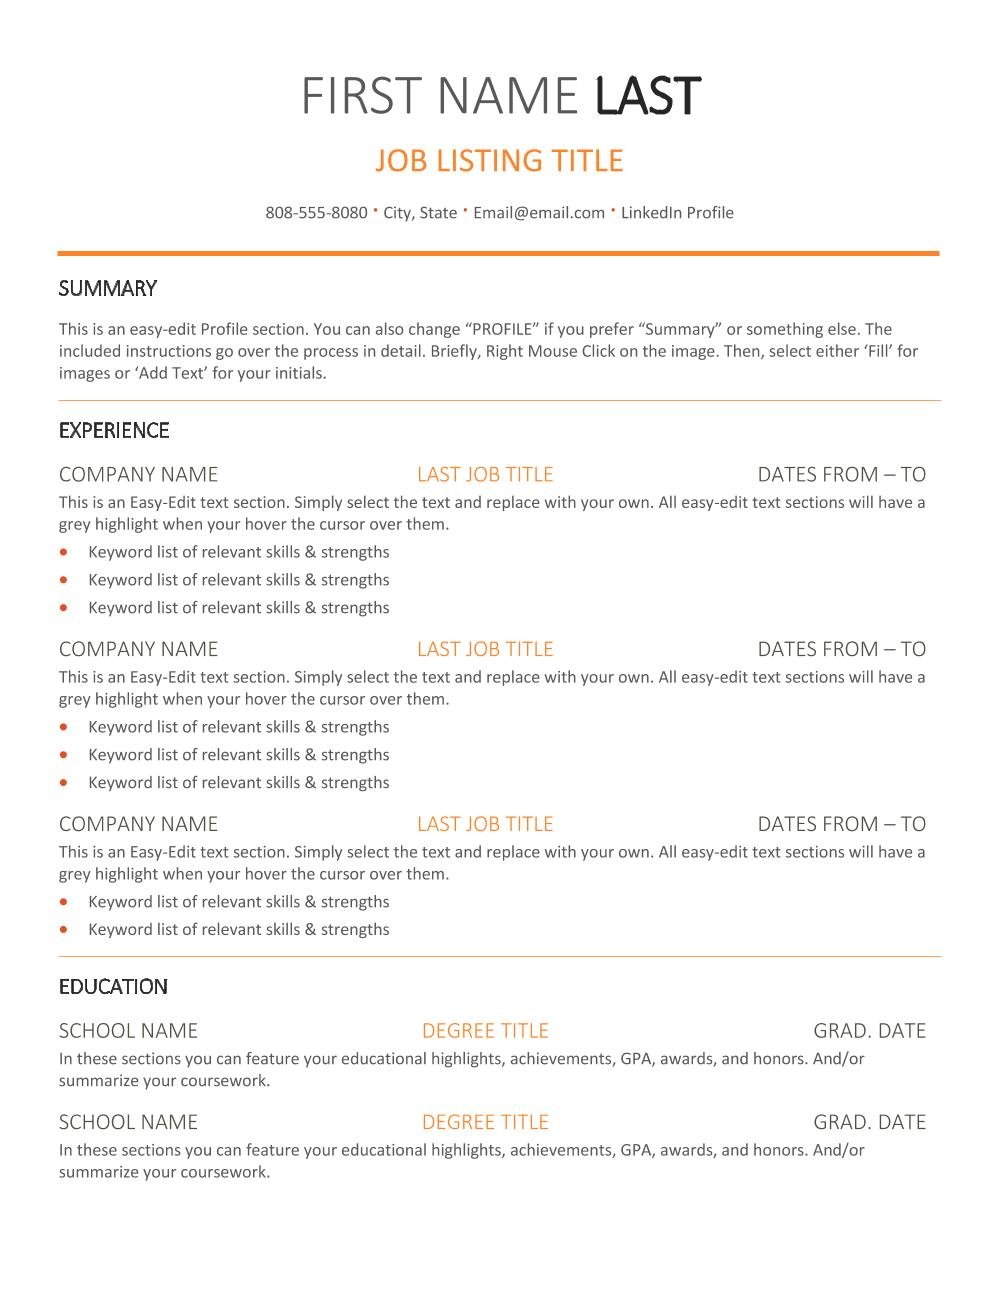 Simple Sectioned - Resume